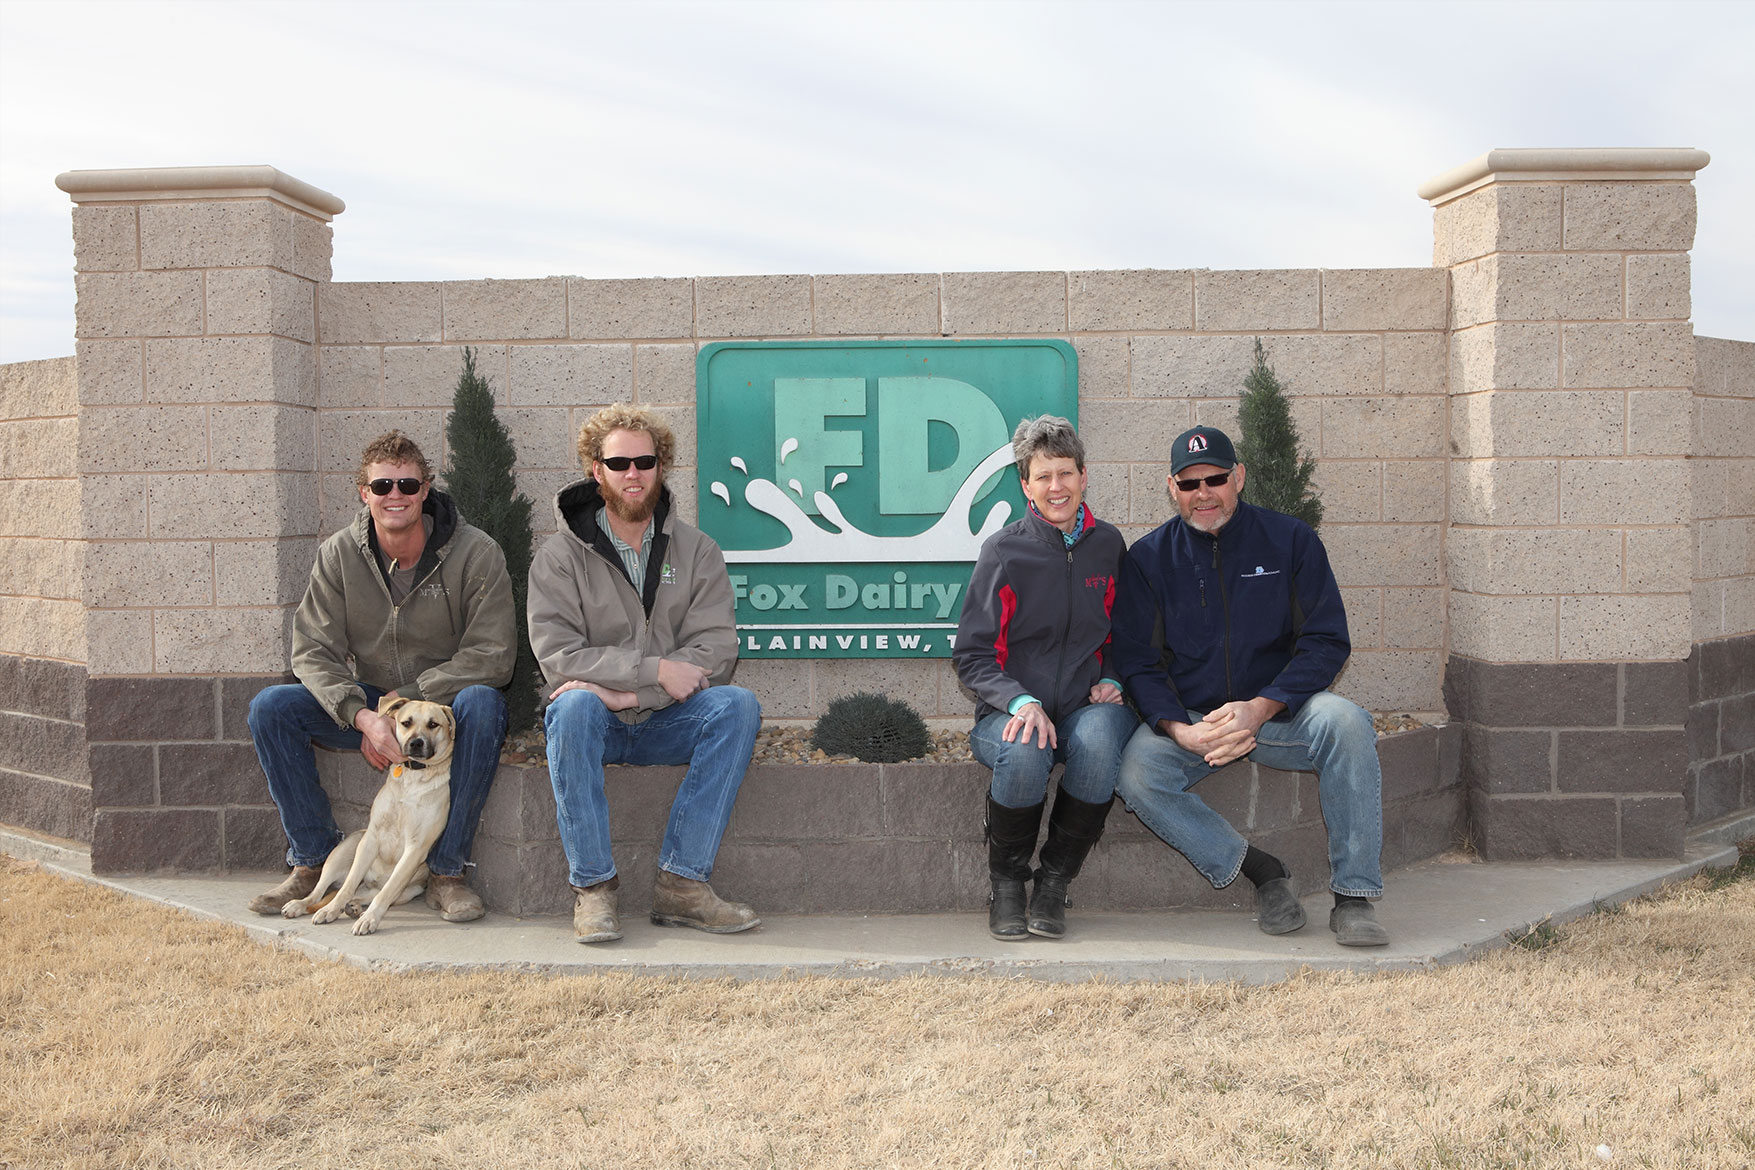 The DeVos family poses in front of the sign for their dairy farm.